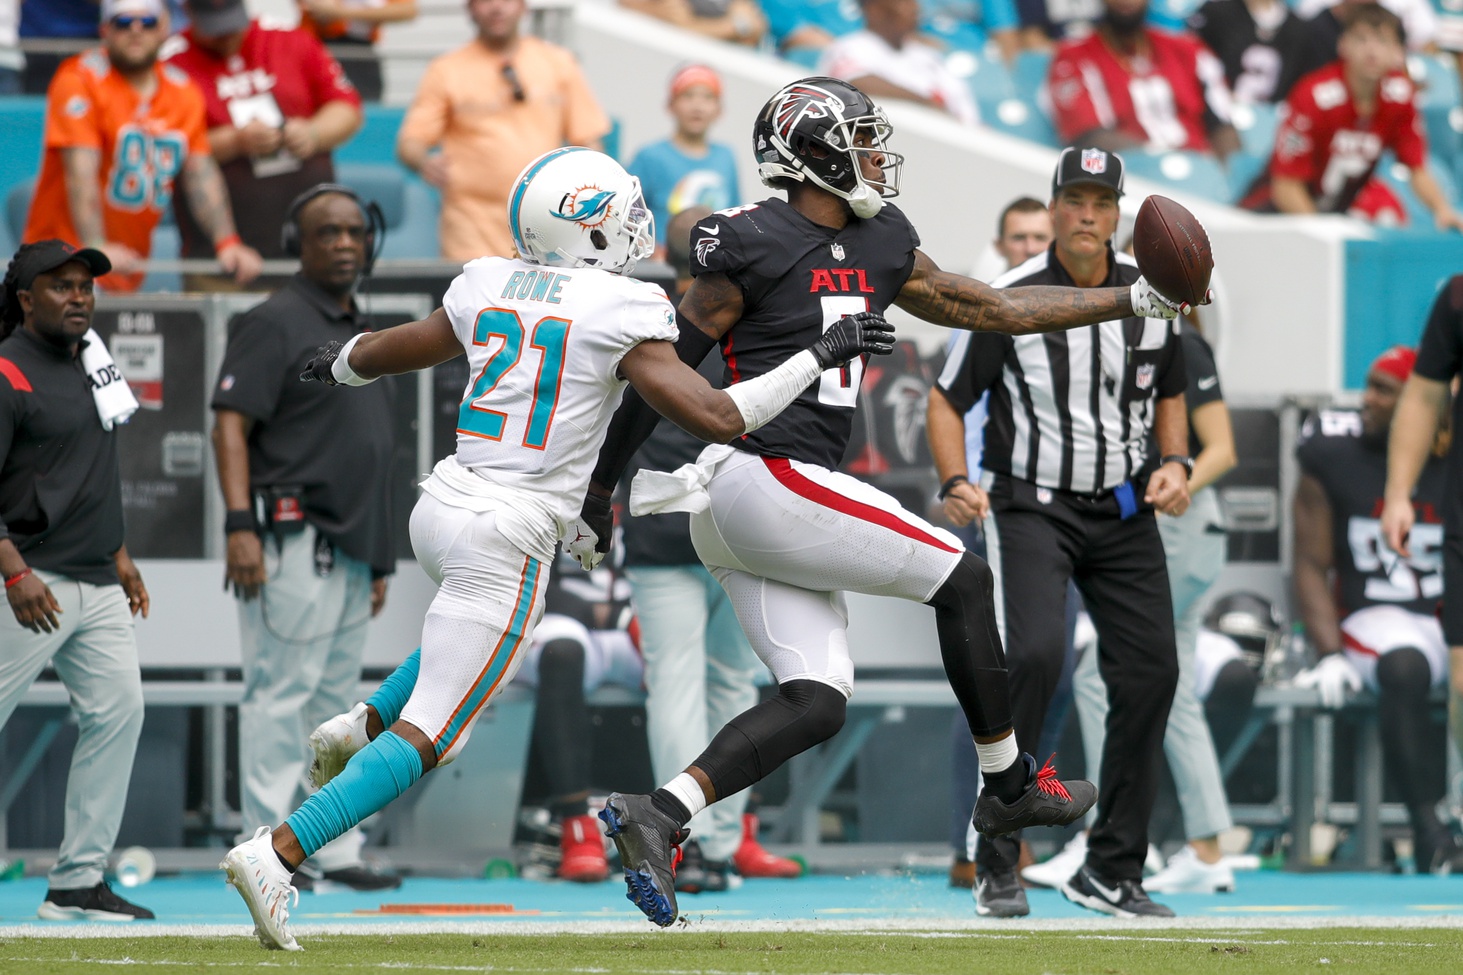 Oct 24, 2021; Miami Gardens, Florida, USA; Atlanta Falcons tight end Kyle Pitts (8) makes a one-handed catch against Miami Dolphins free safety Eric Rowe (21) during the second quarter of the game at Hard Rock Stadium. Mandatory Credit: Sam Navarro-USA TODAY Sports